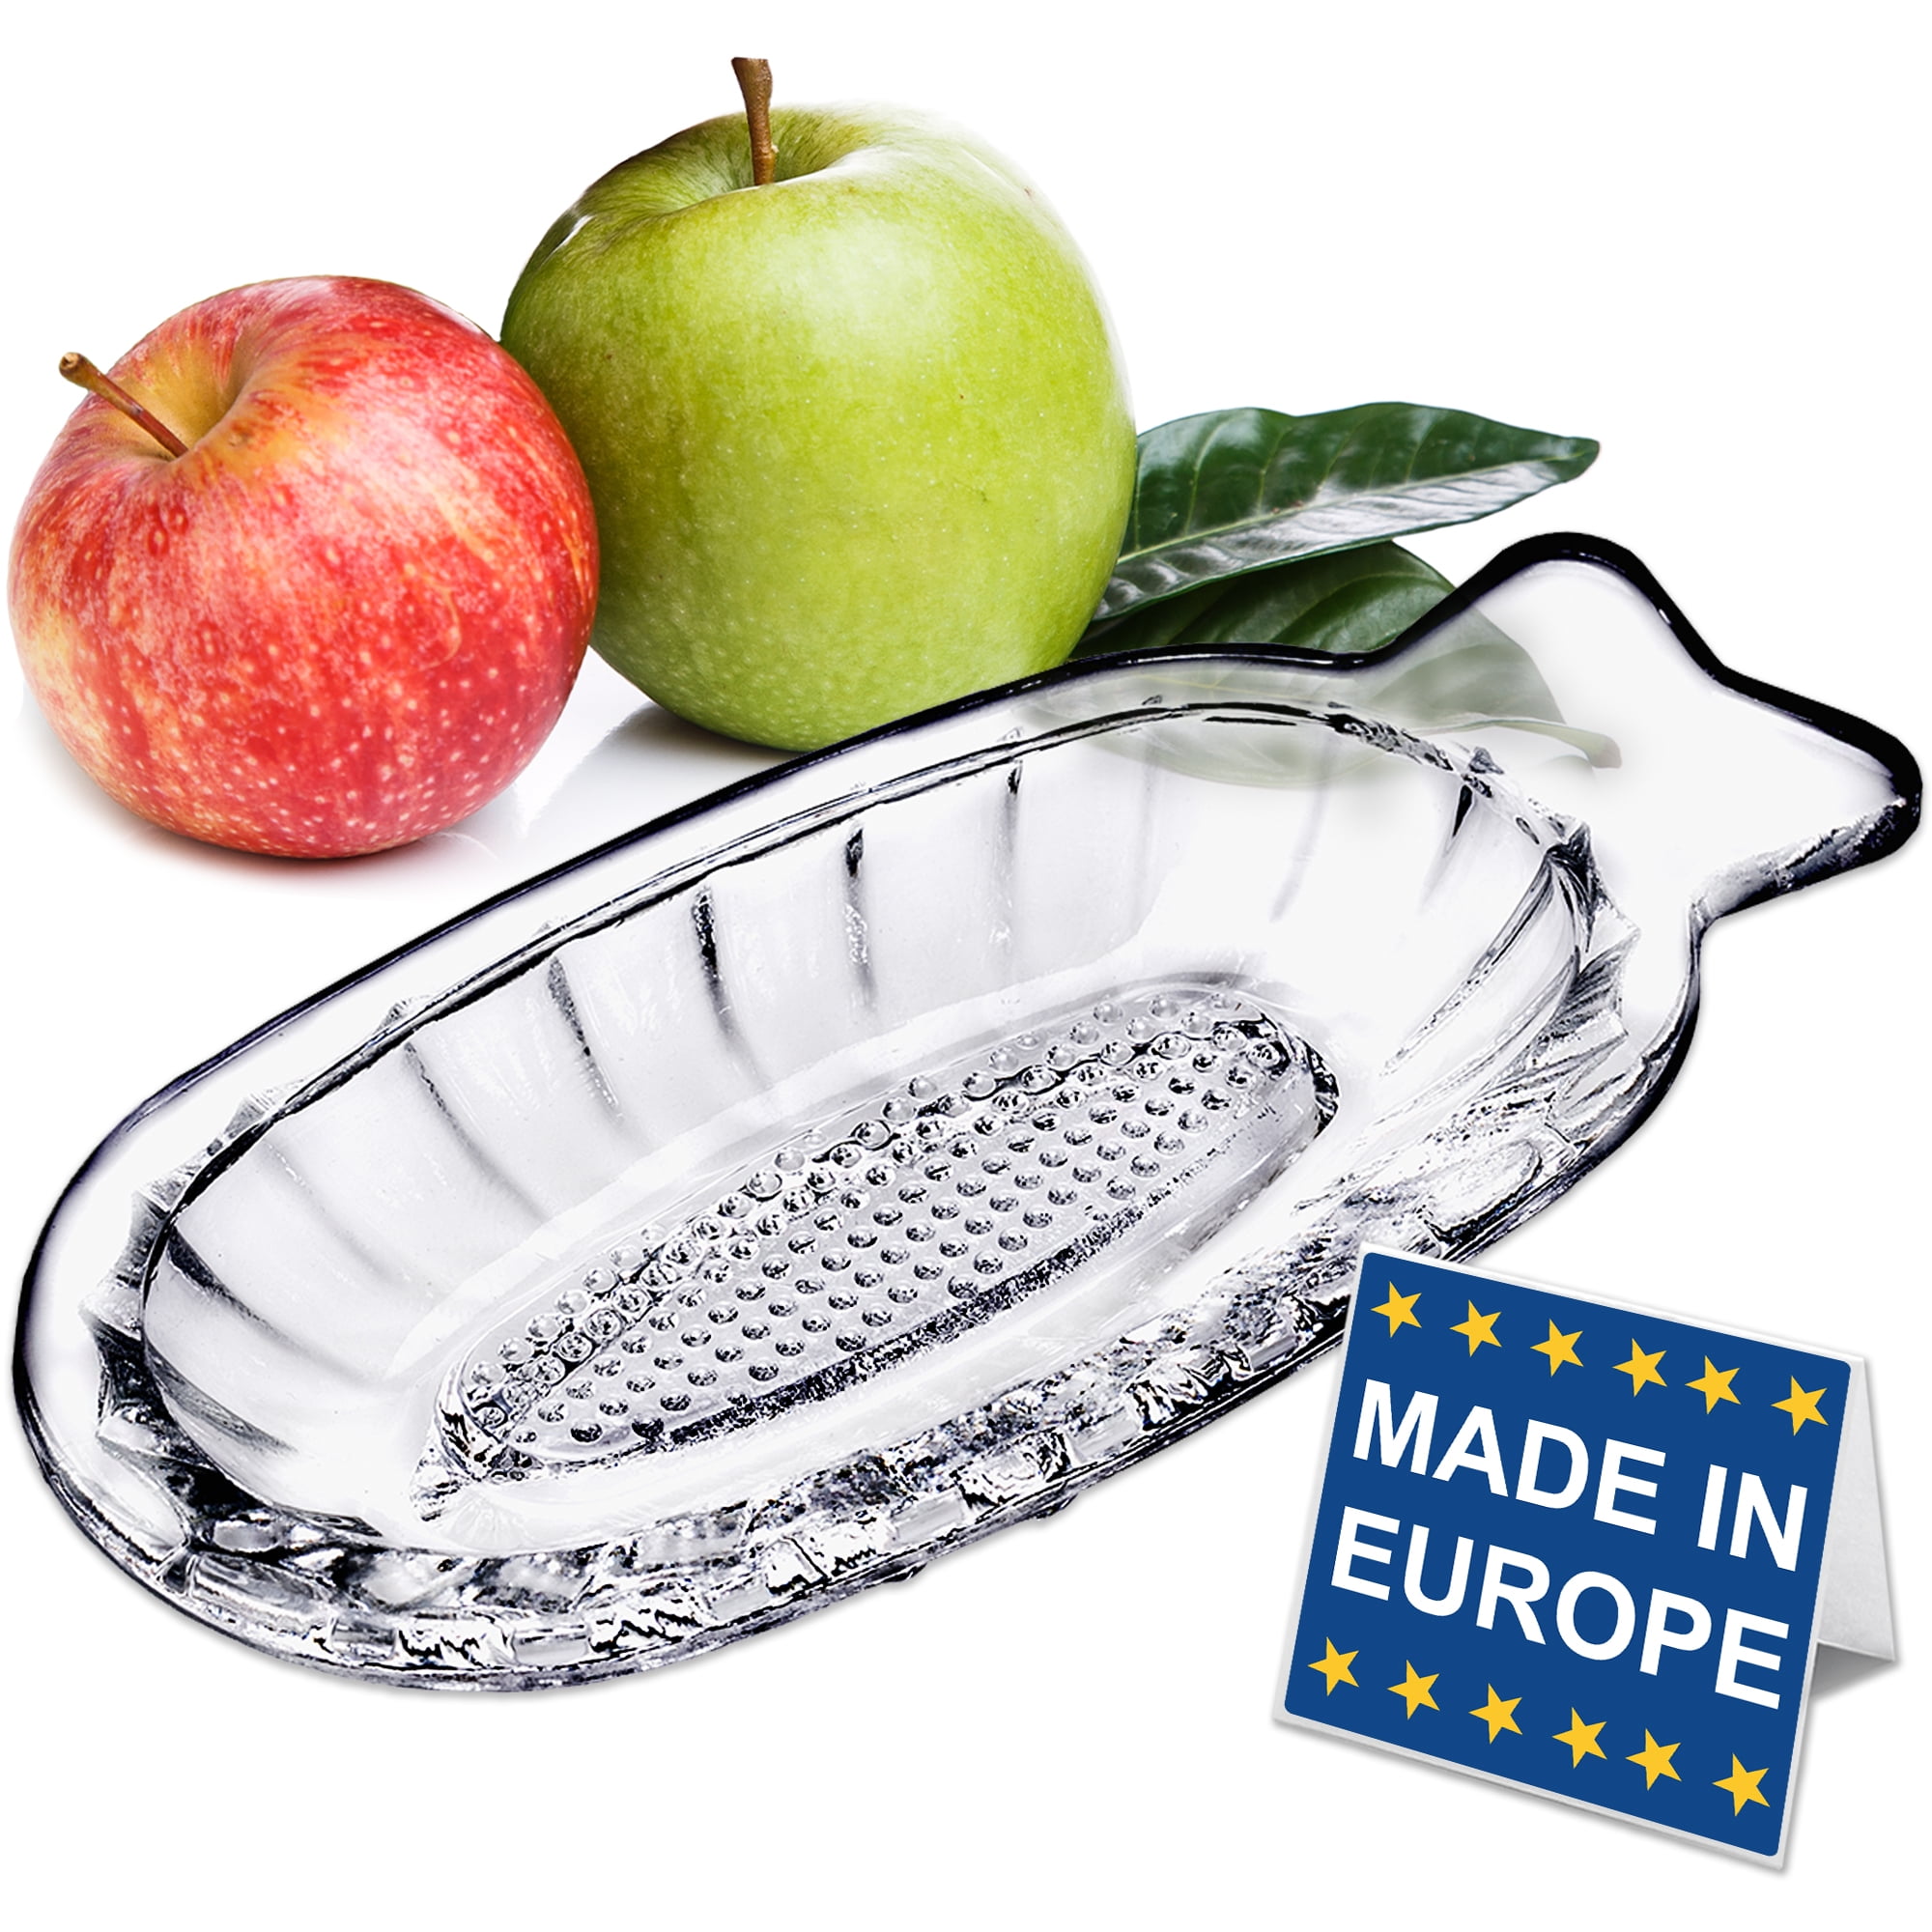 Crystalia Cheese Grater with Glass Storage Container Sprinkler, Stainless  Steel Food Processor for Parmesan, Garlic, Onion, Vegetable, Small Fine  Food